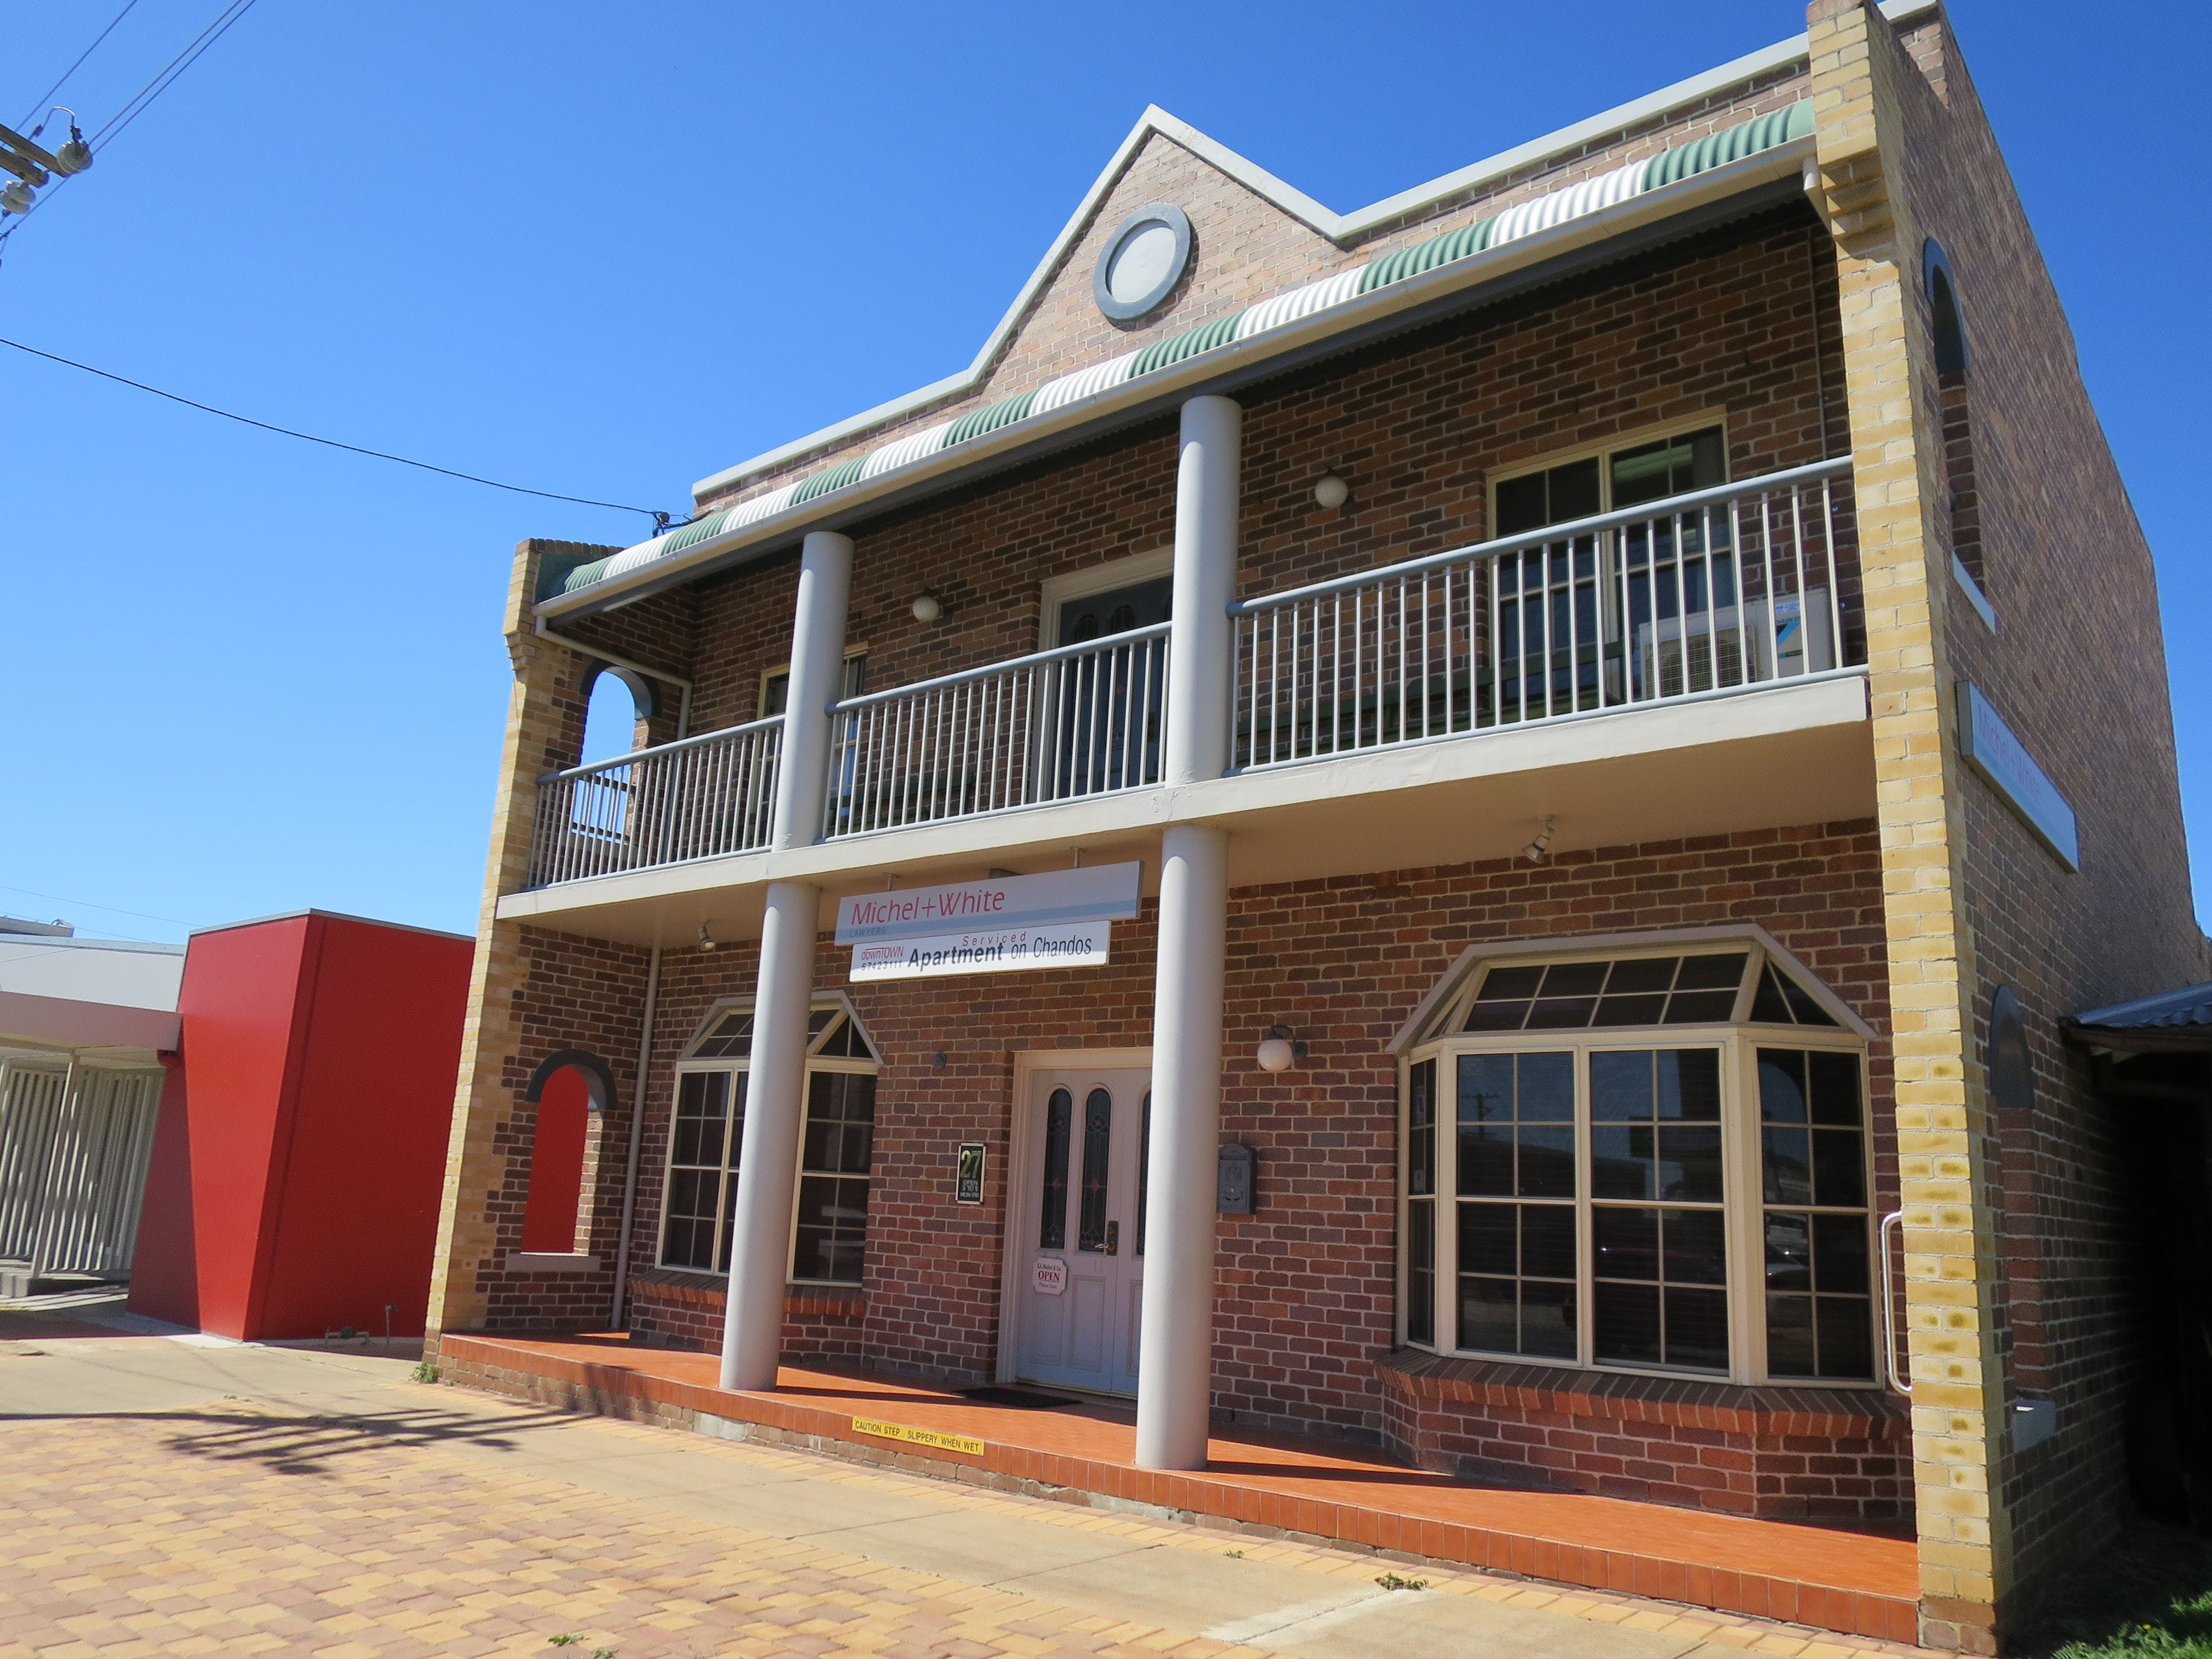 Downtown Apartment on Chandos - Accommodation Cooktown